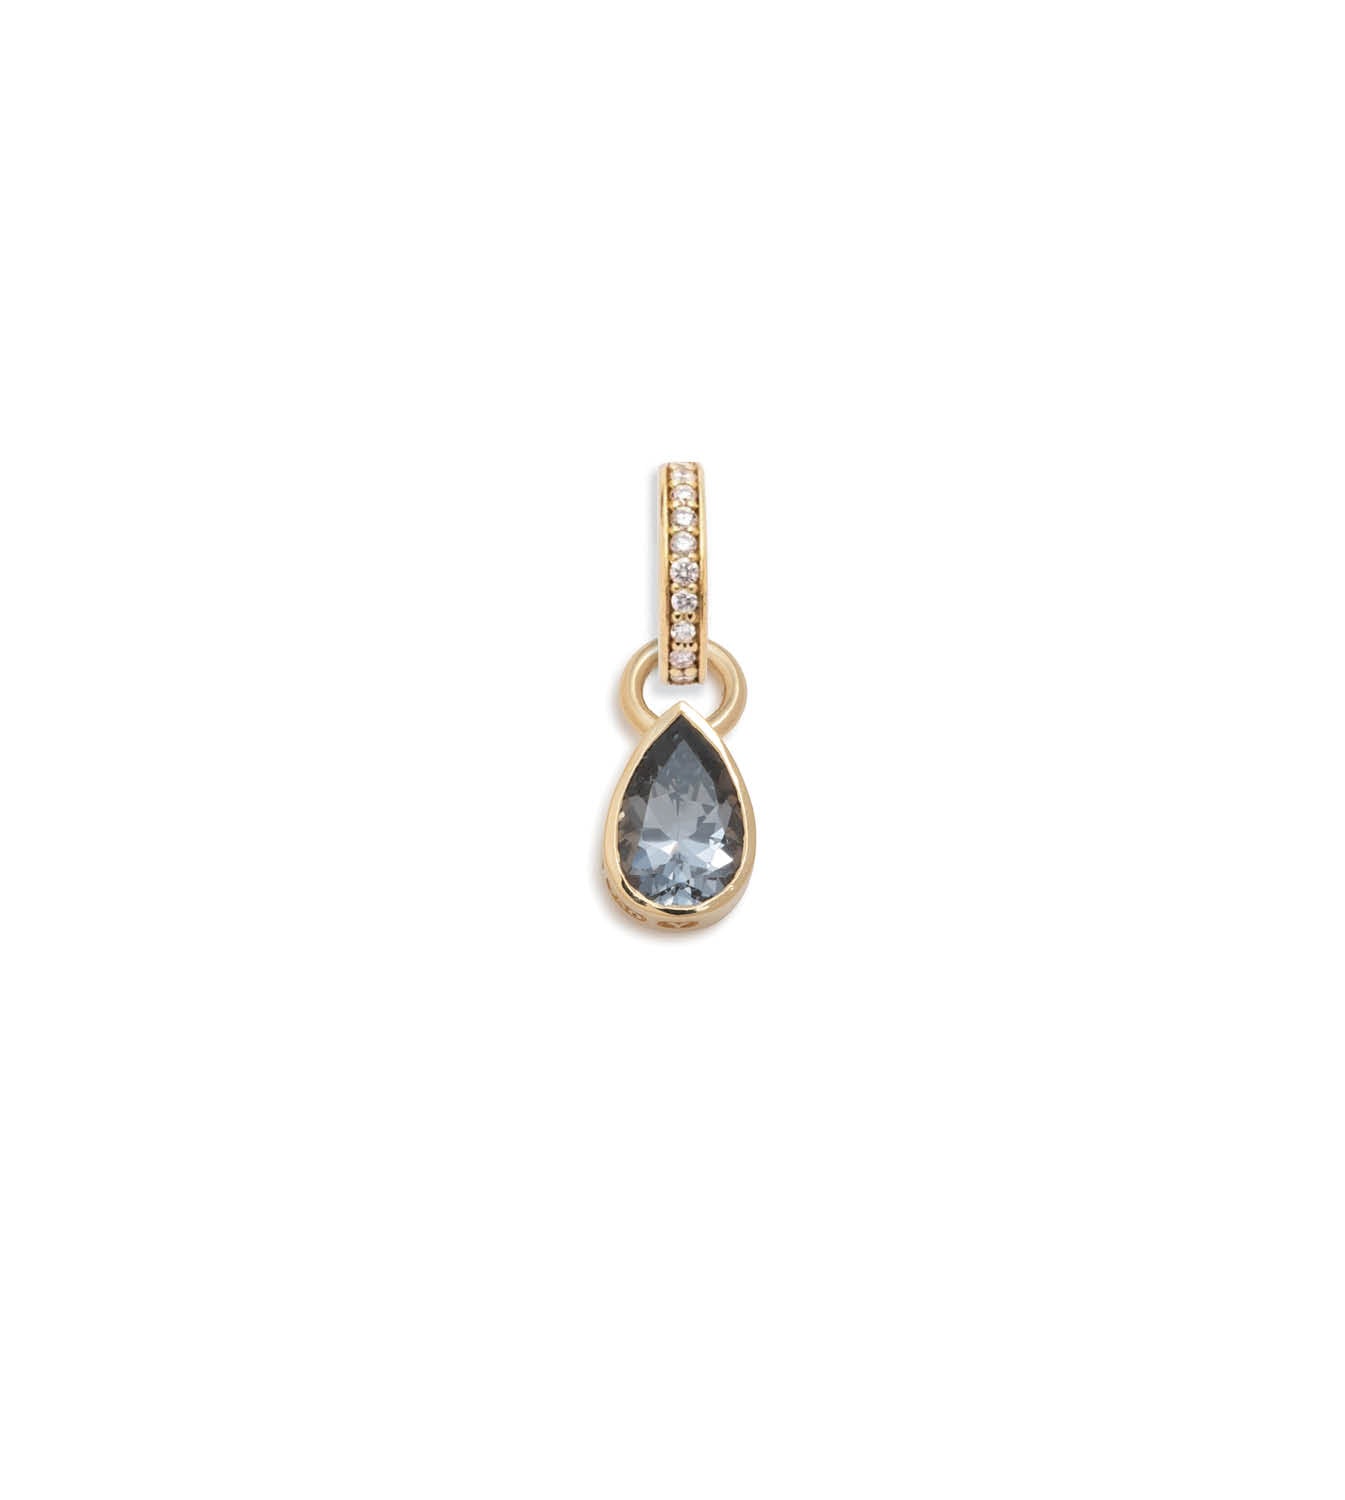 Forever & Always a Pair - Love : .7ct Grey Spinel Pear Pendant with Oval Pushgate